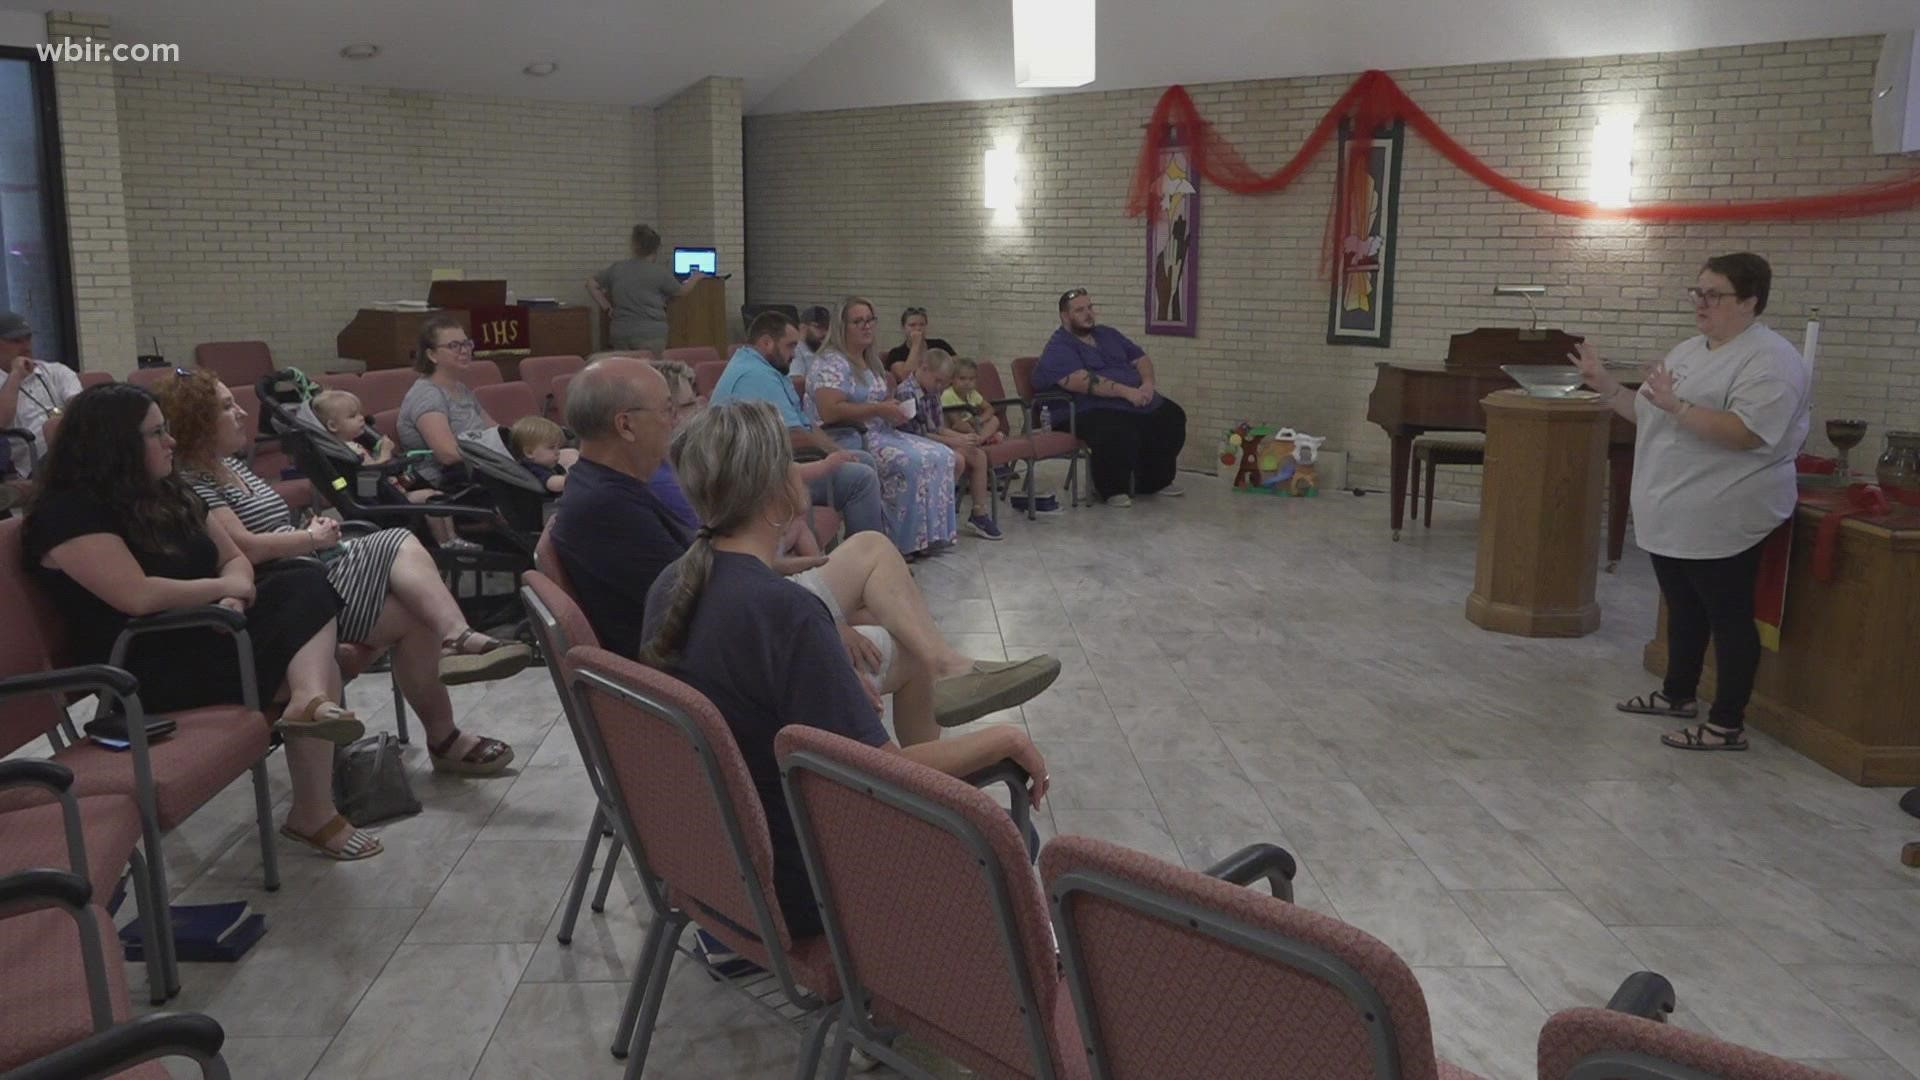 People at the Powell Presbyterian Church gathered to honor the victims of the Robb Elementary School shooting in Texas.